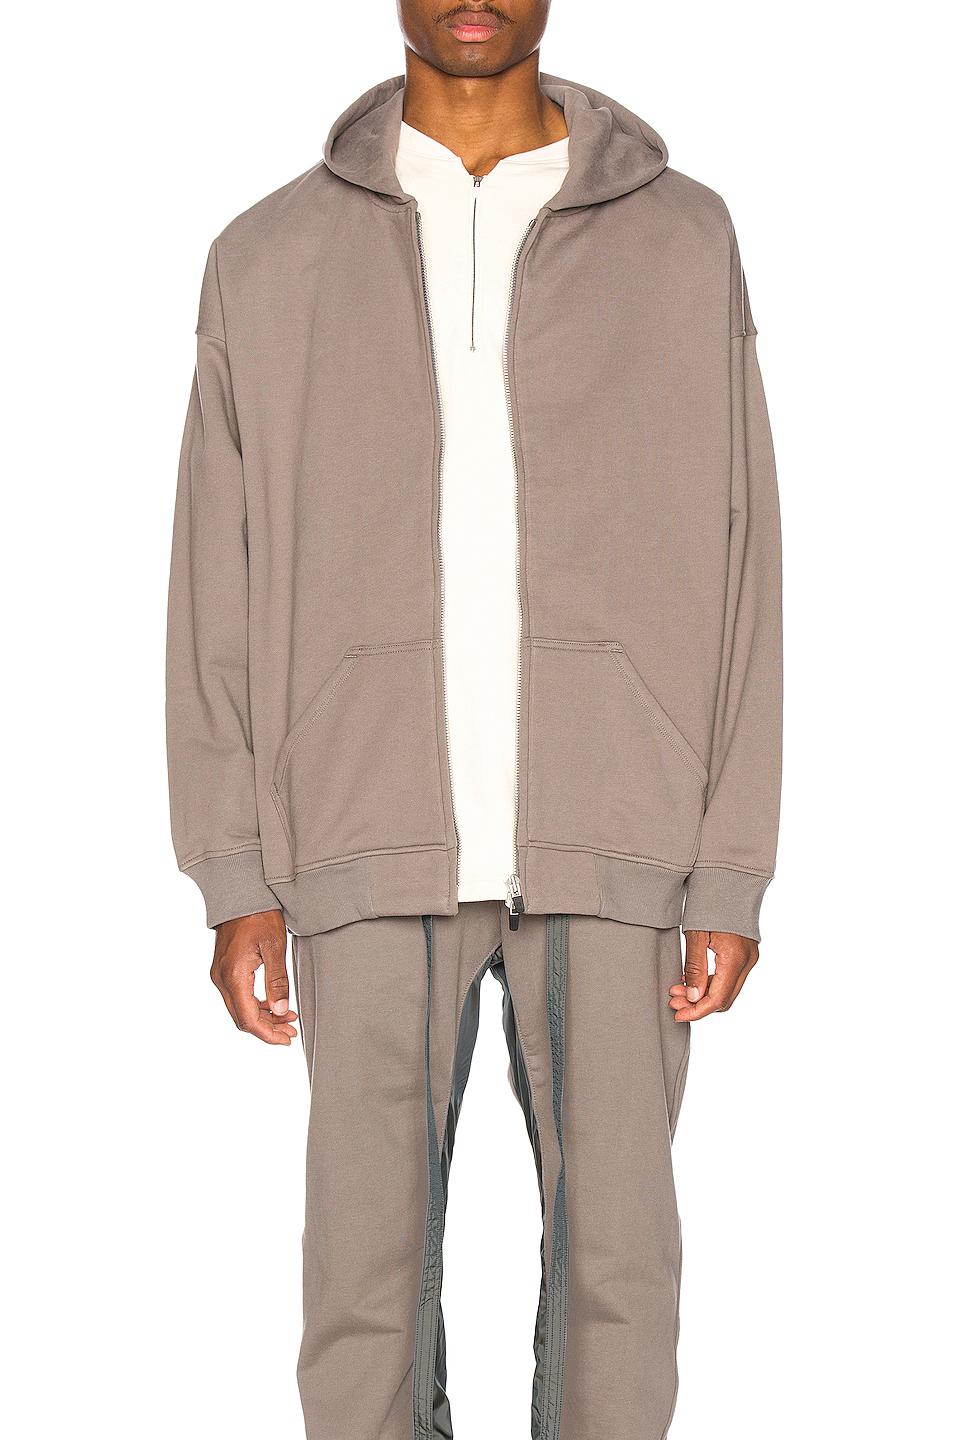 Fear Of God Cotton Everyday Full Zip Hoodie in Gray for Men - Lyst